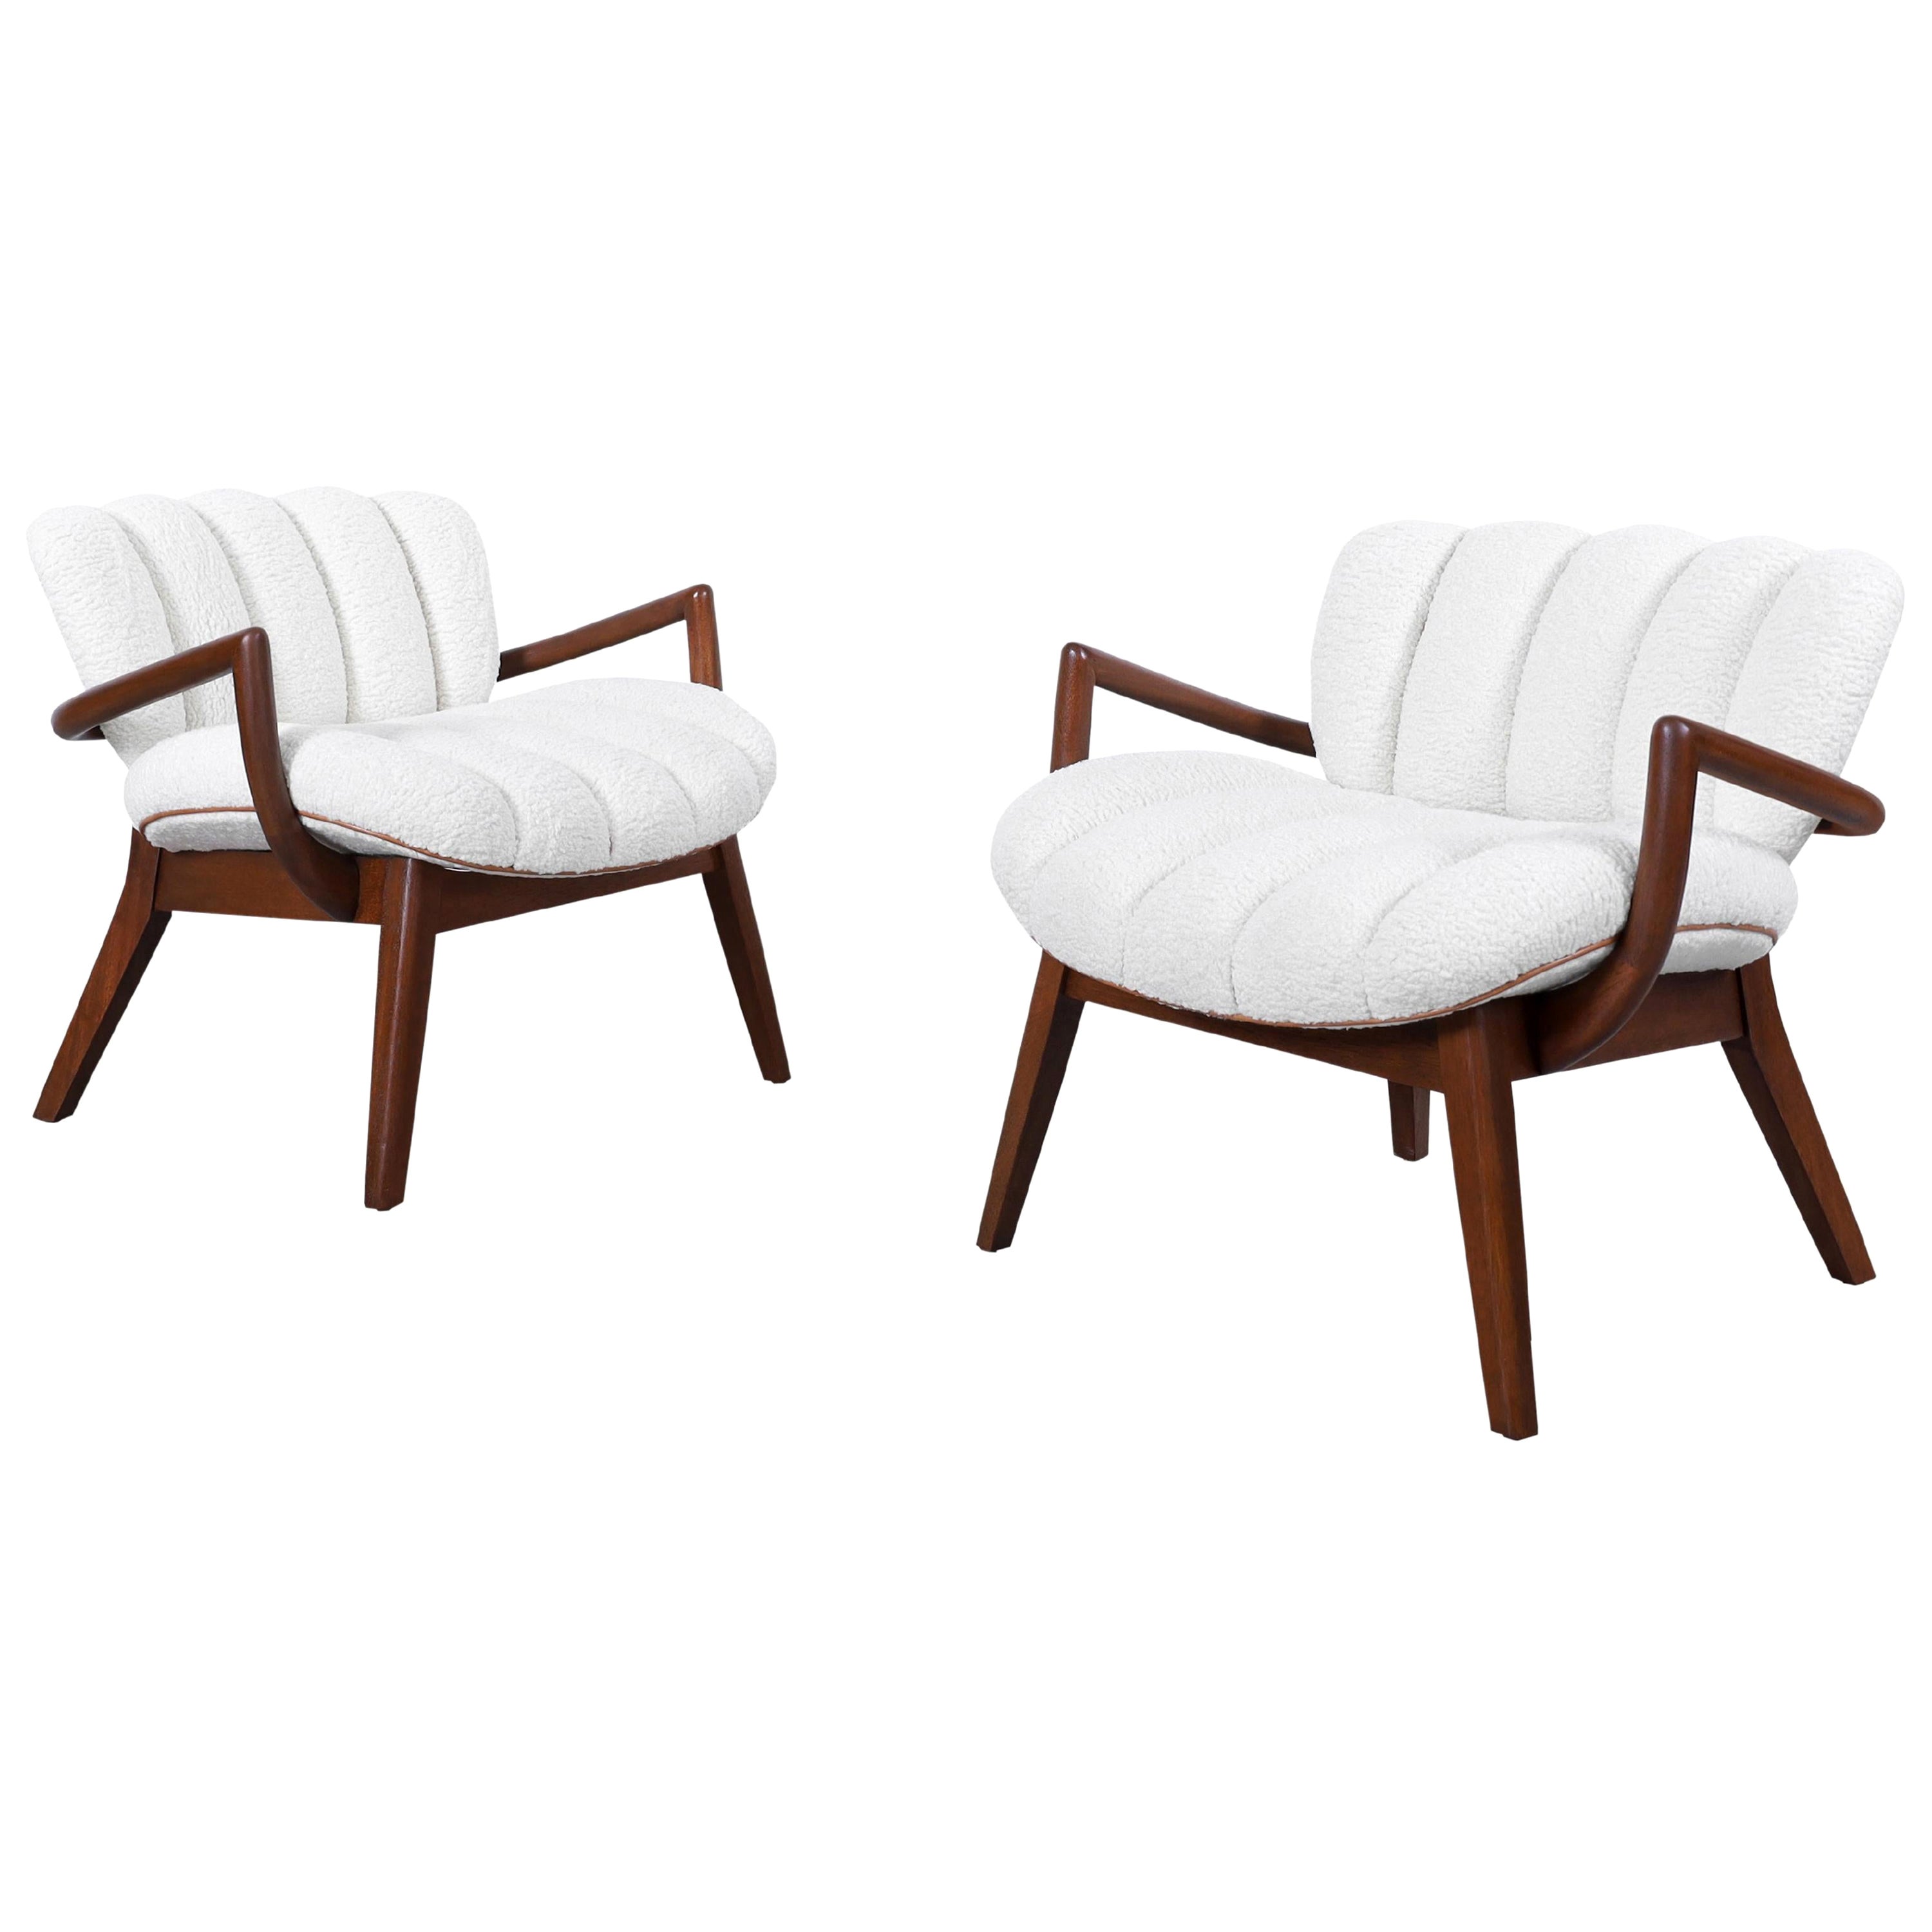 Rare Bouclé and Leather Arm Chairs by Paul Laszlo